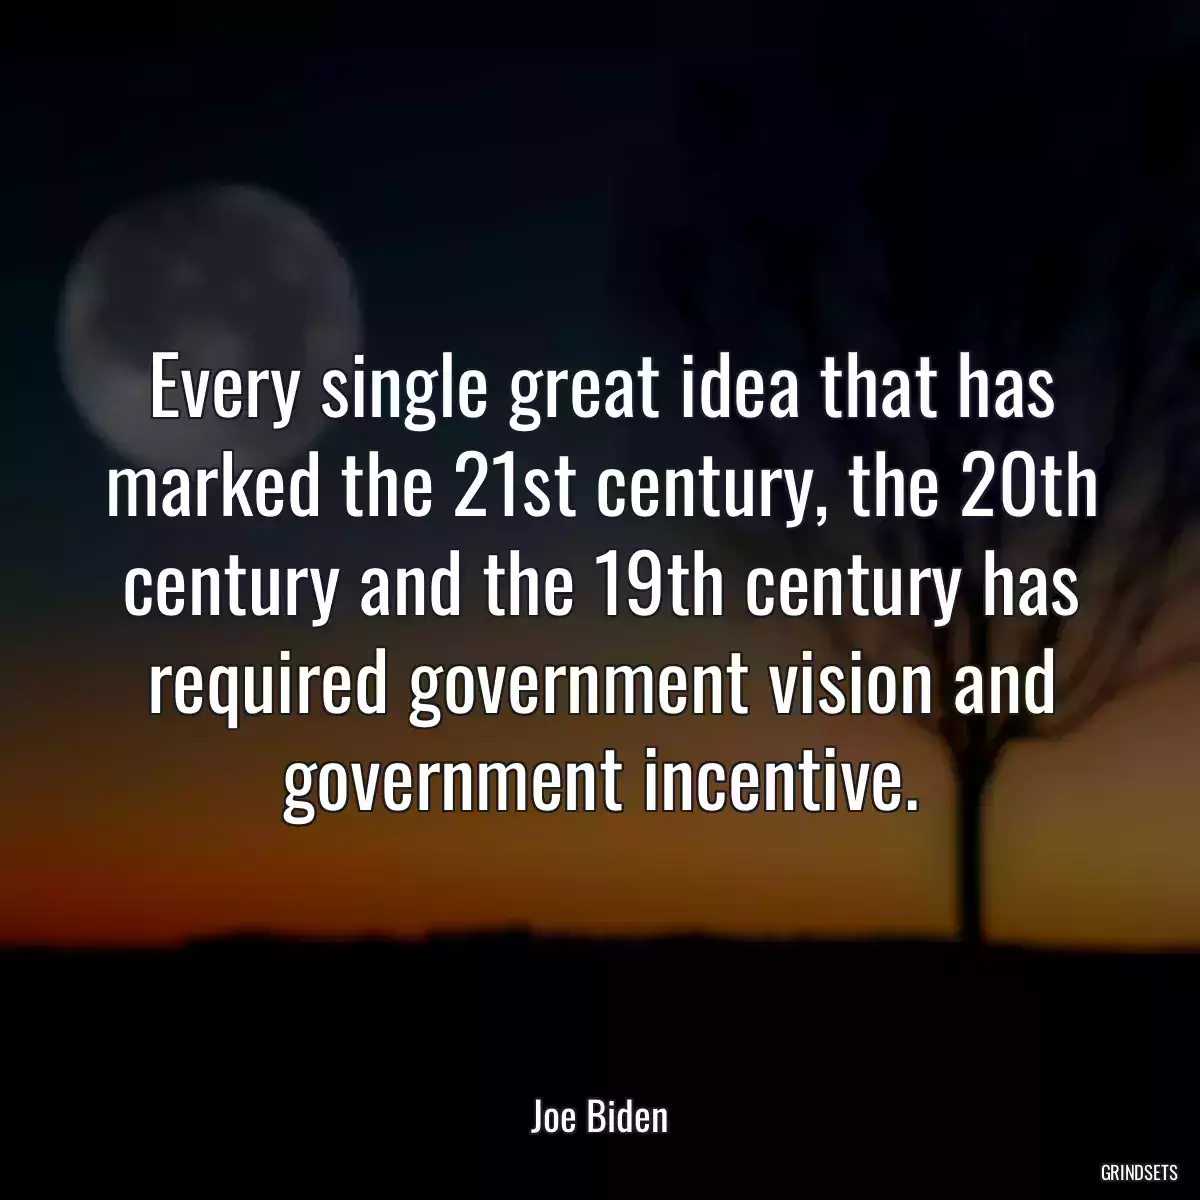 Every single great idea that has marked the 21st century, the 20th century and the 19th century has required government vision and government incentive.